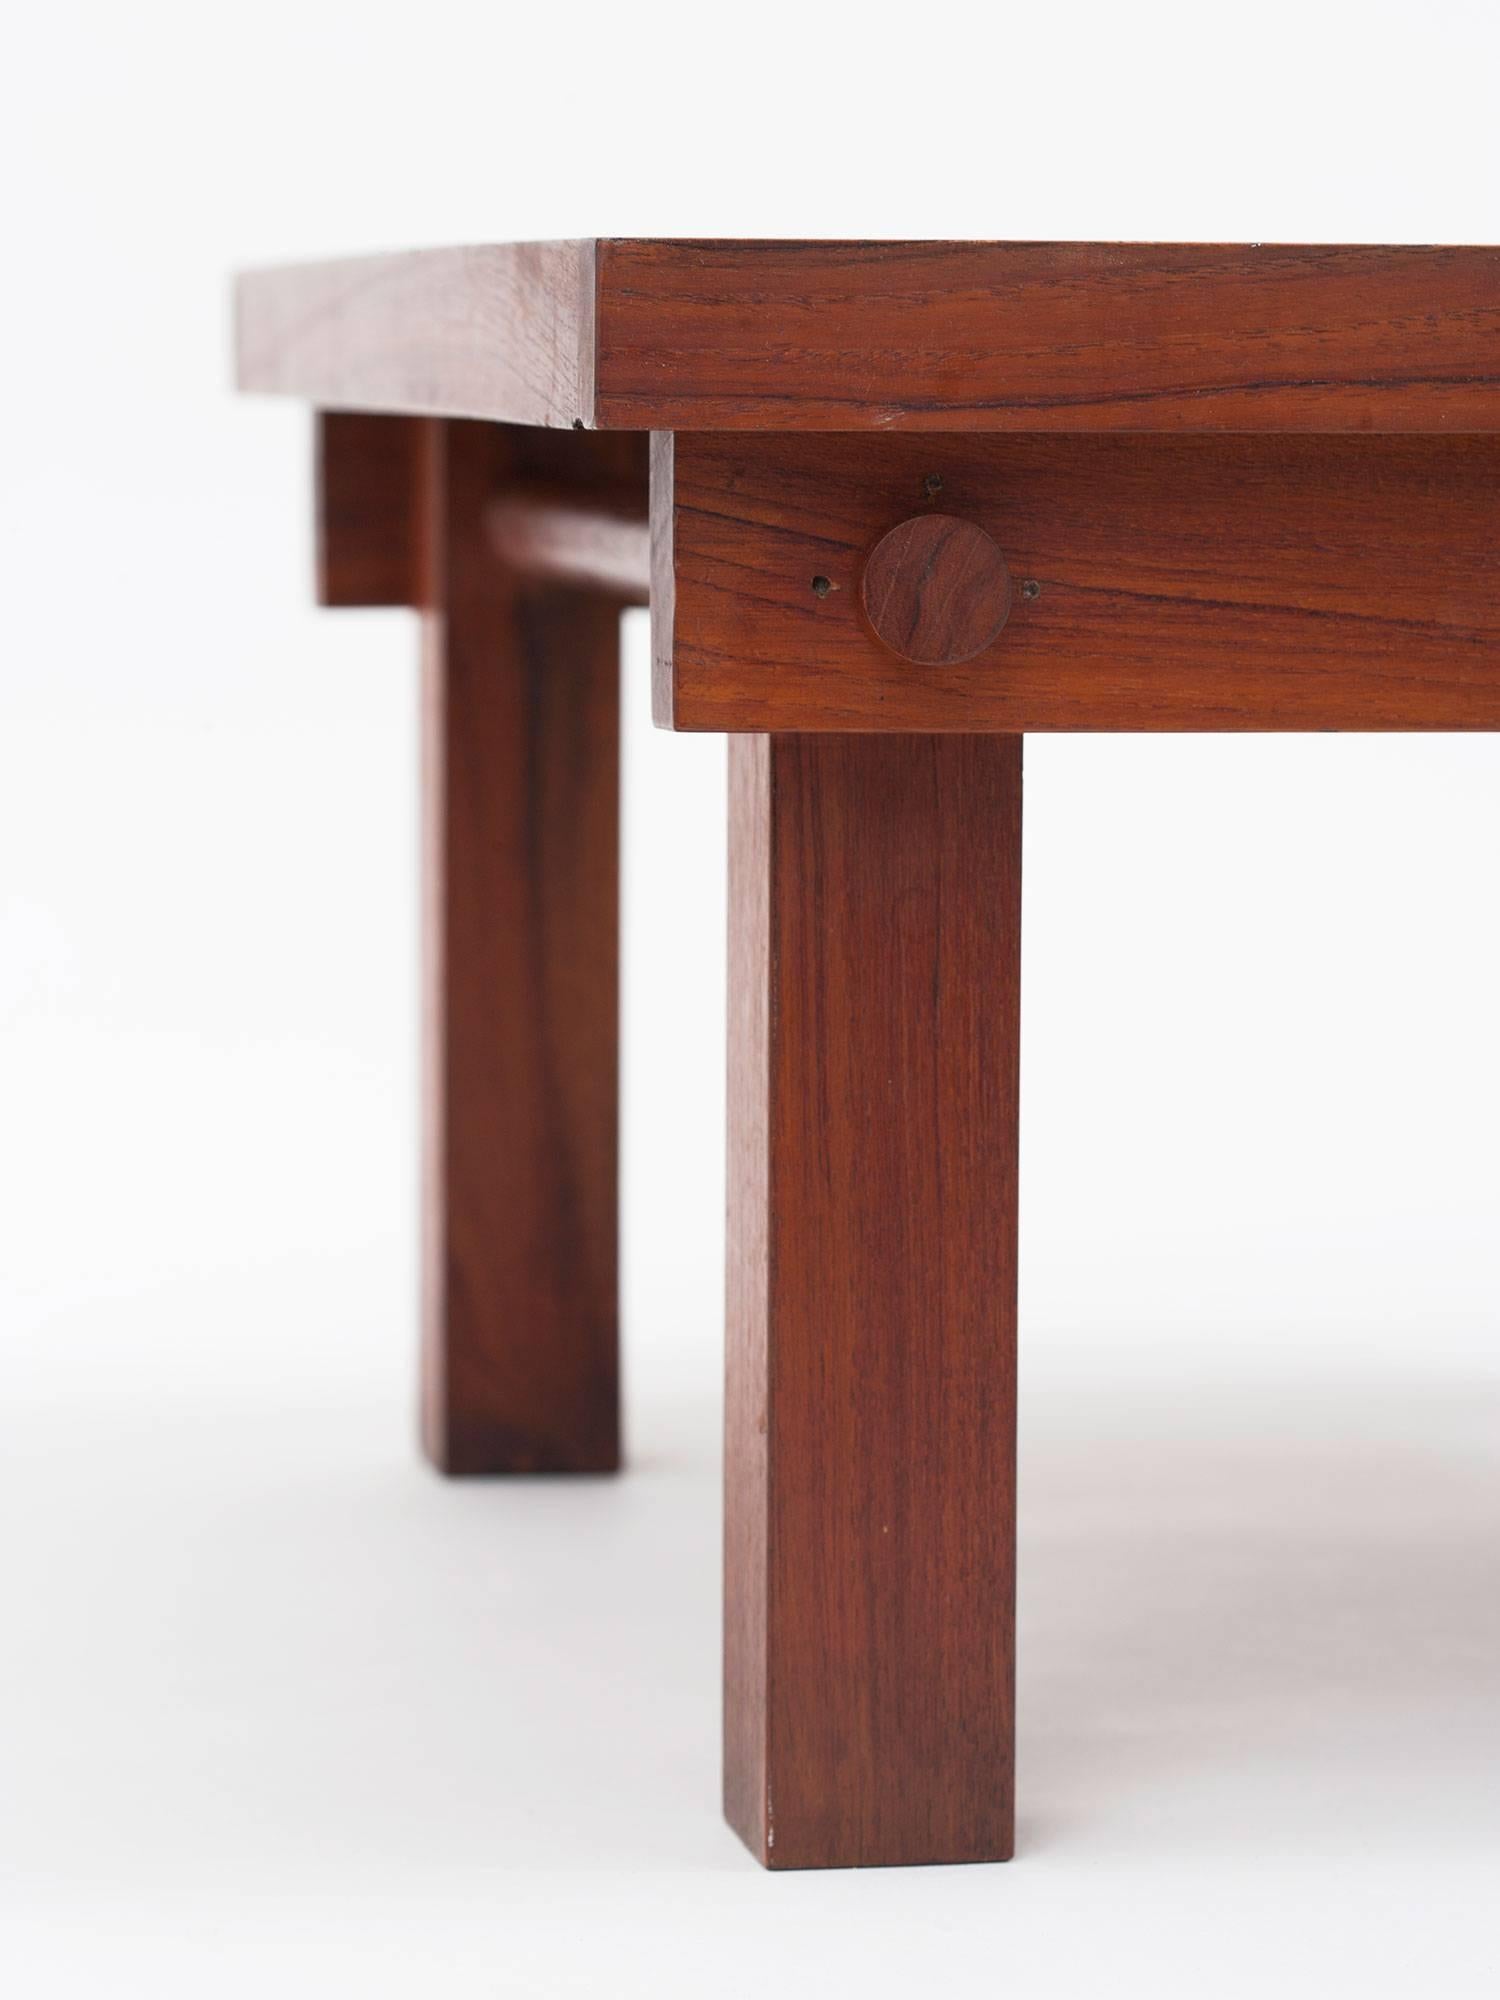 Modernist teak table by the Indian designer Mini Boga for her furniture company Taaru. Two available.

Minnie Boga (b. 1932) founded the New Delhi-based contemporary furniture brand Taaru in 1968. Apart from being one of the first prominent woman